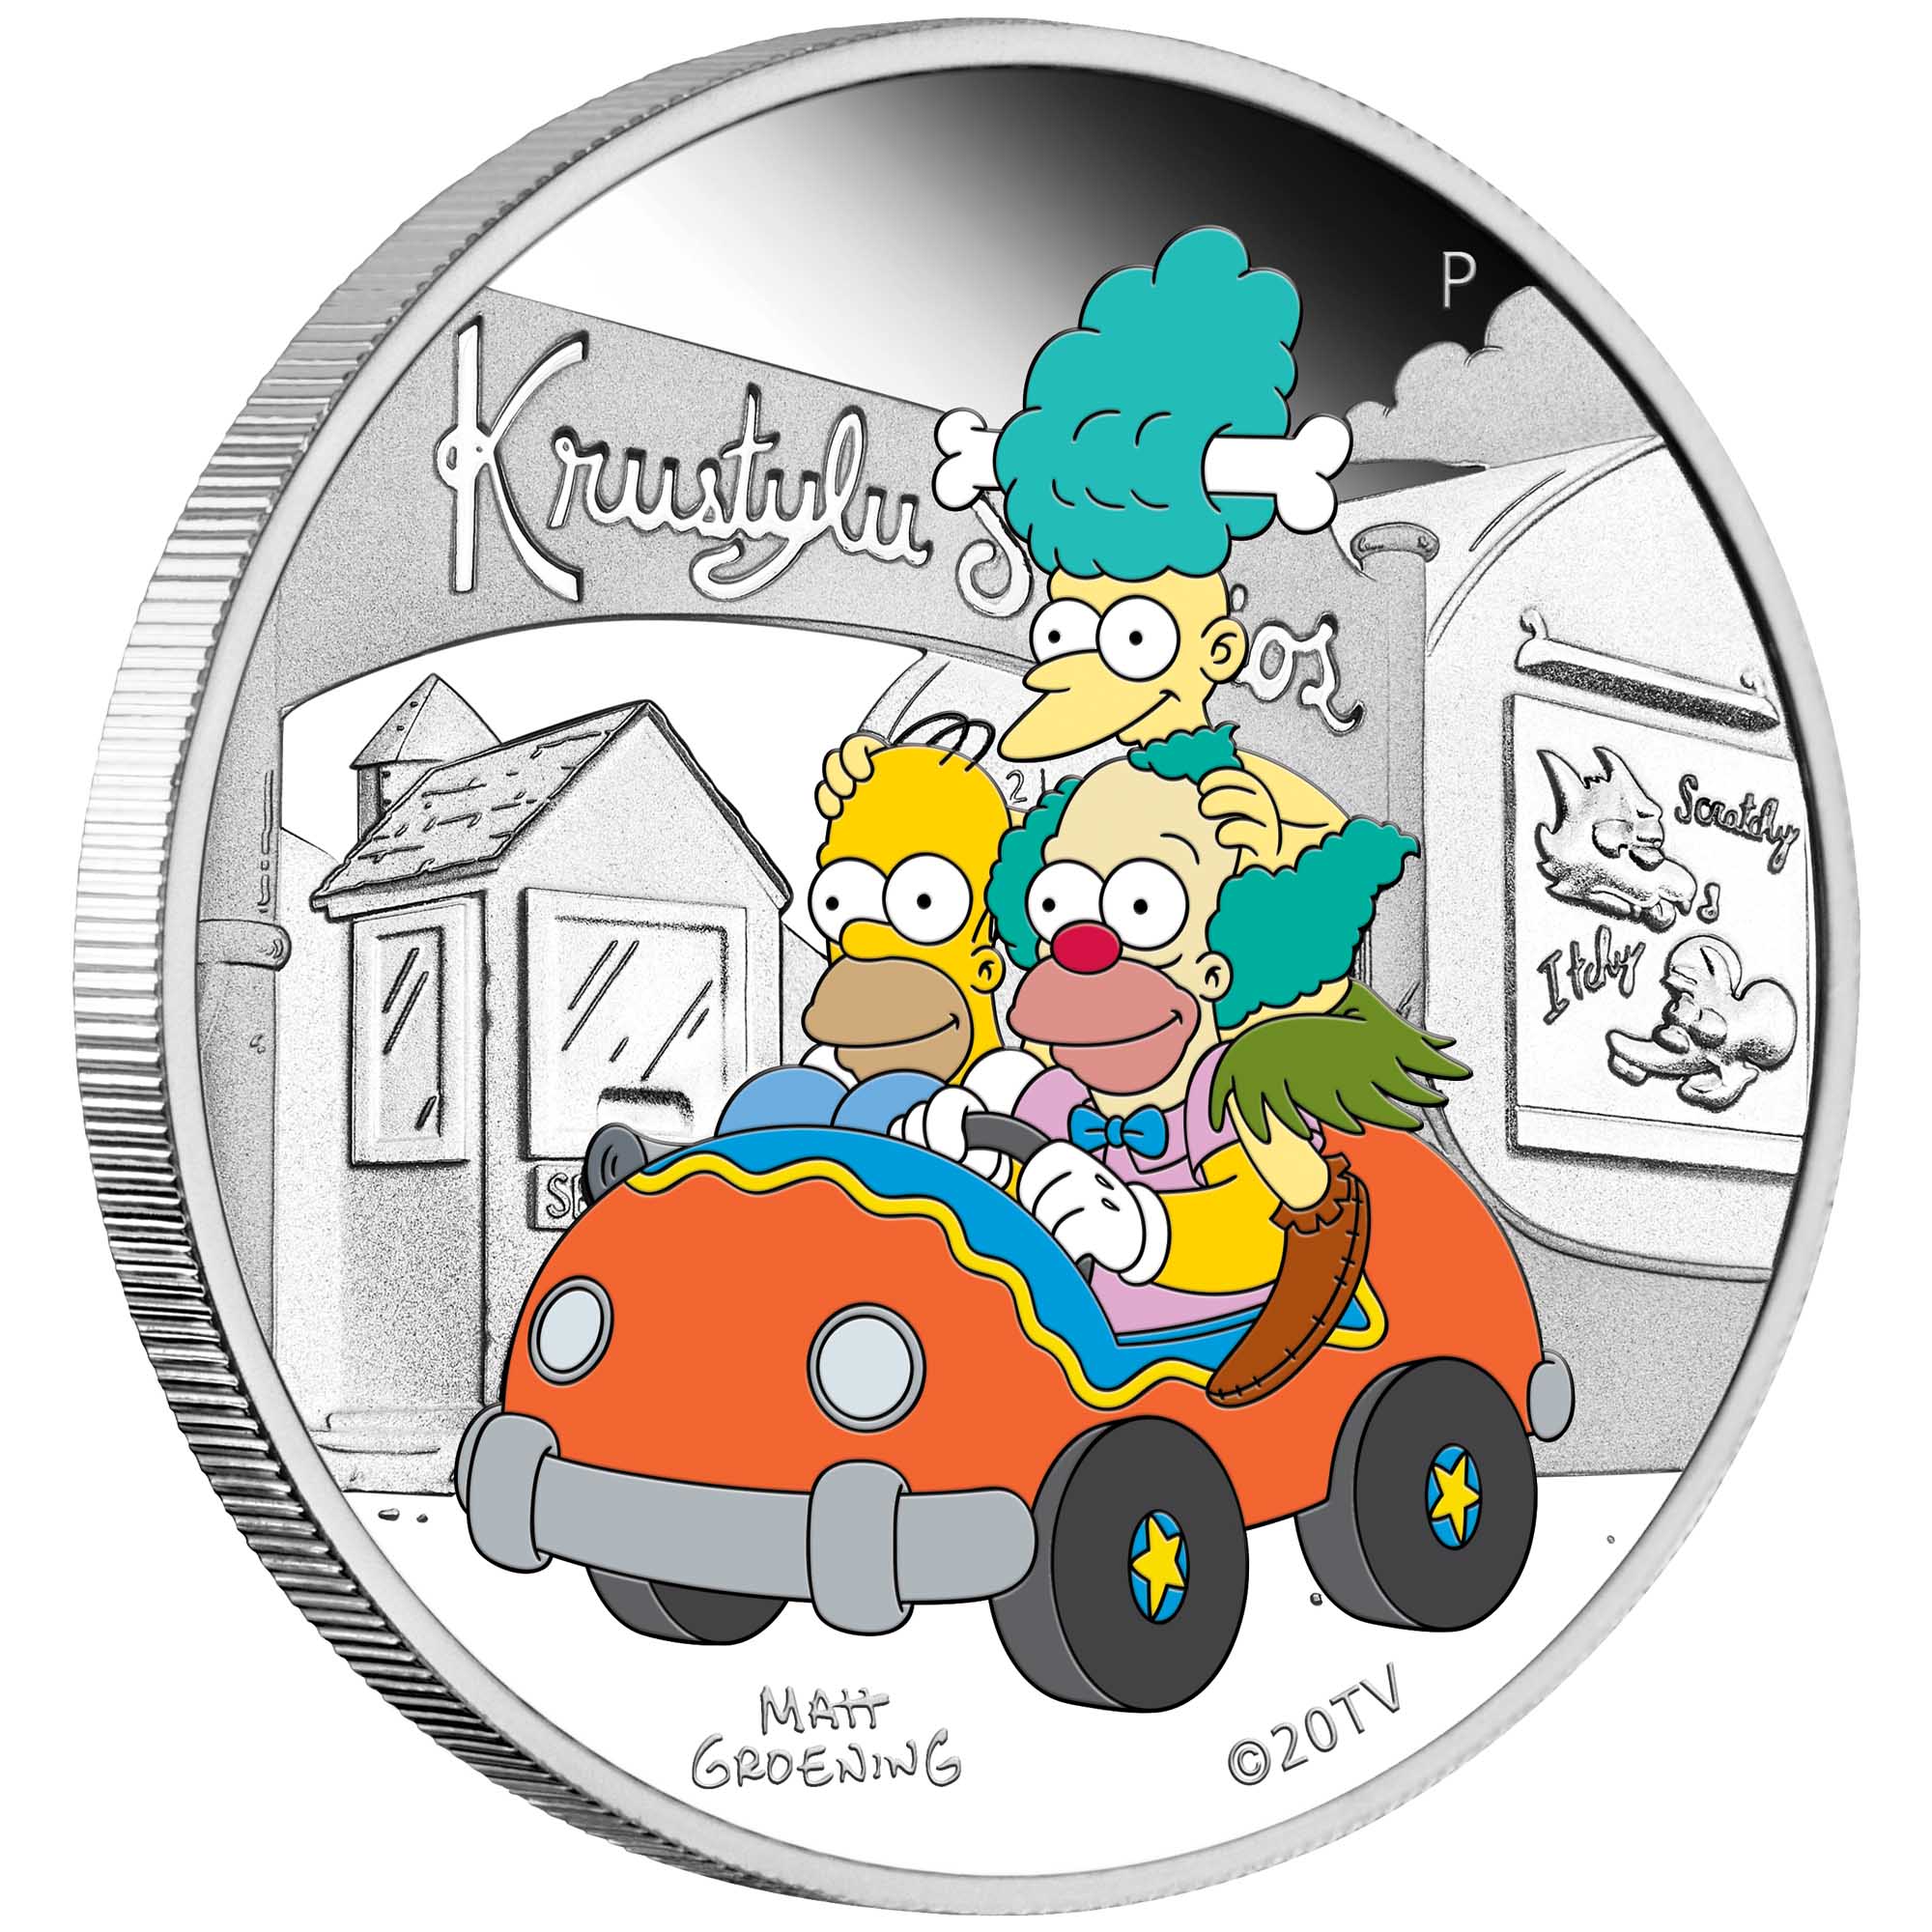 Krustylu Studios 2022 1oz Silver Proof Coloured Coin | The Perth Mint